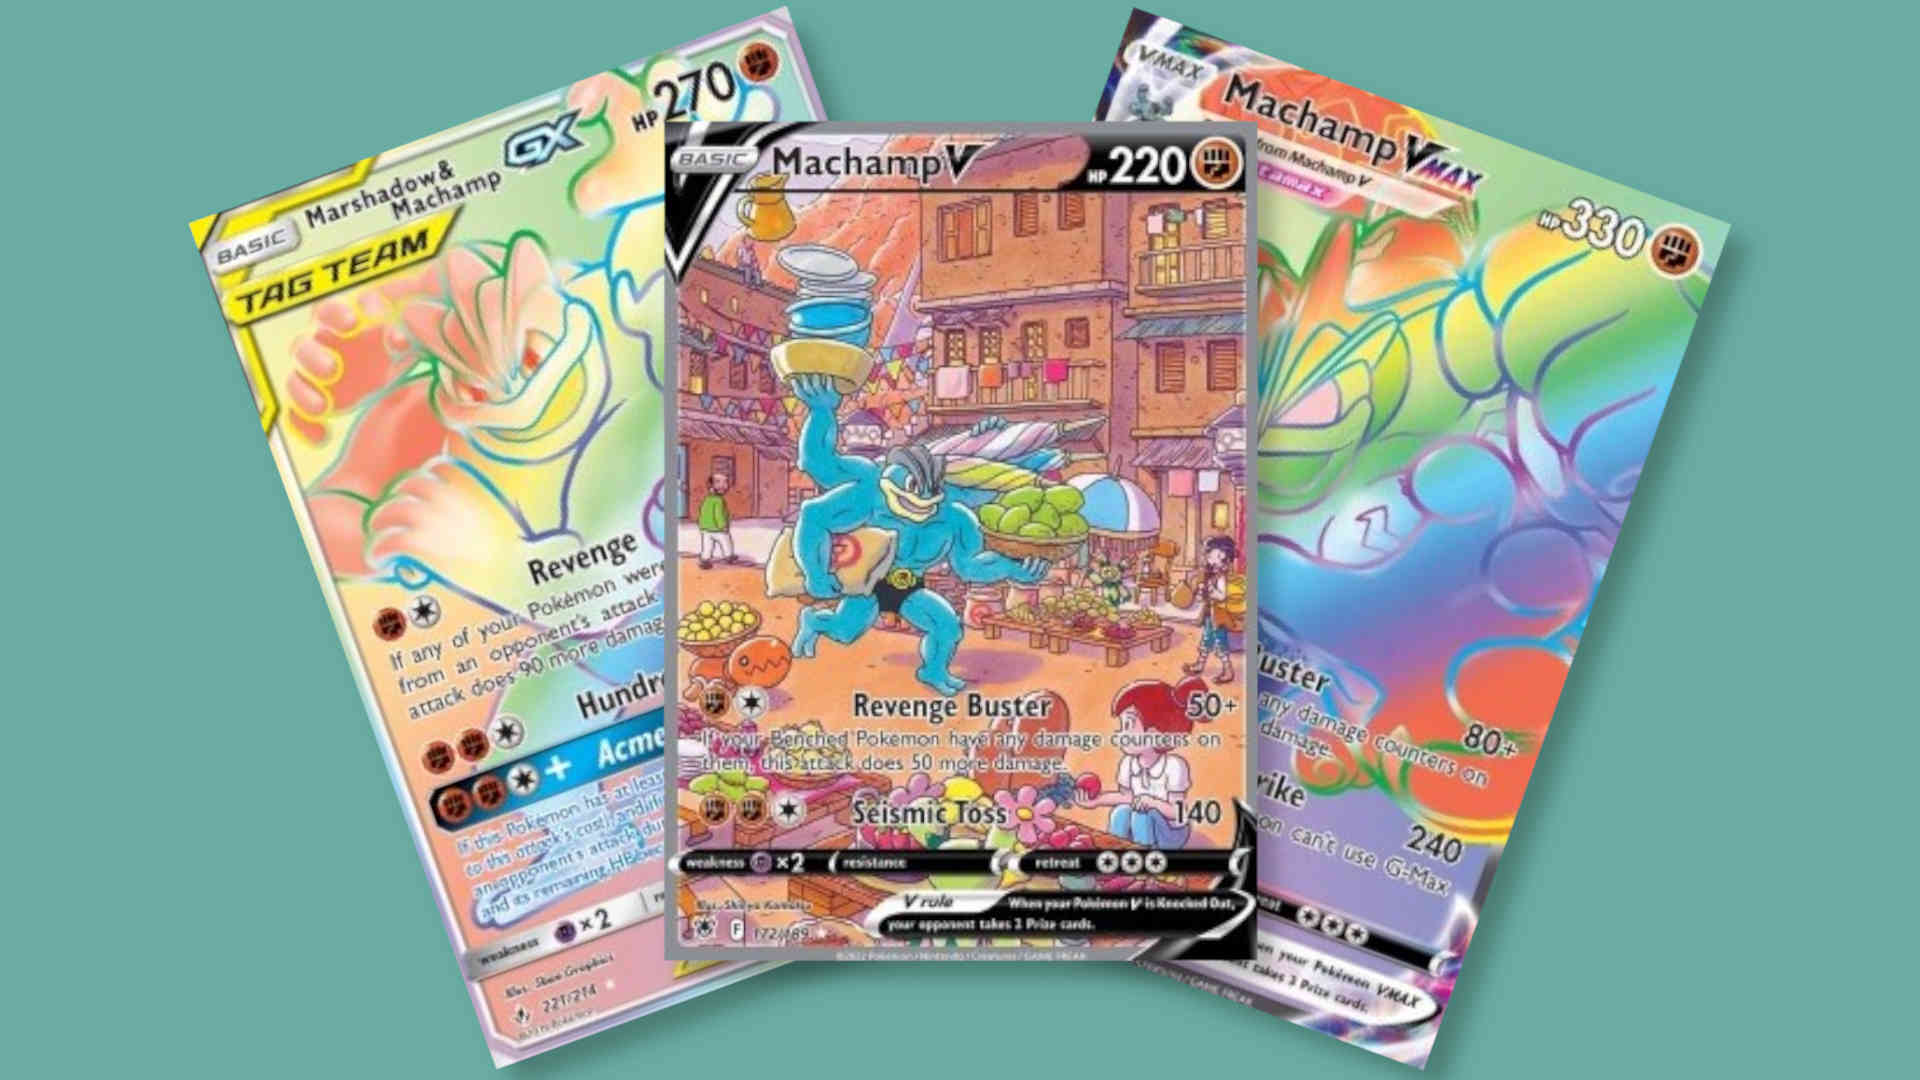 We have actual value op Topps, WotC, Nintendo and other Pokemon cards.